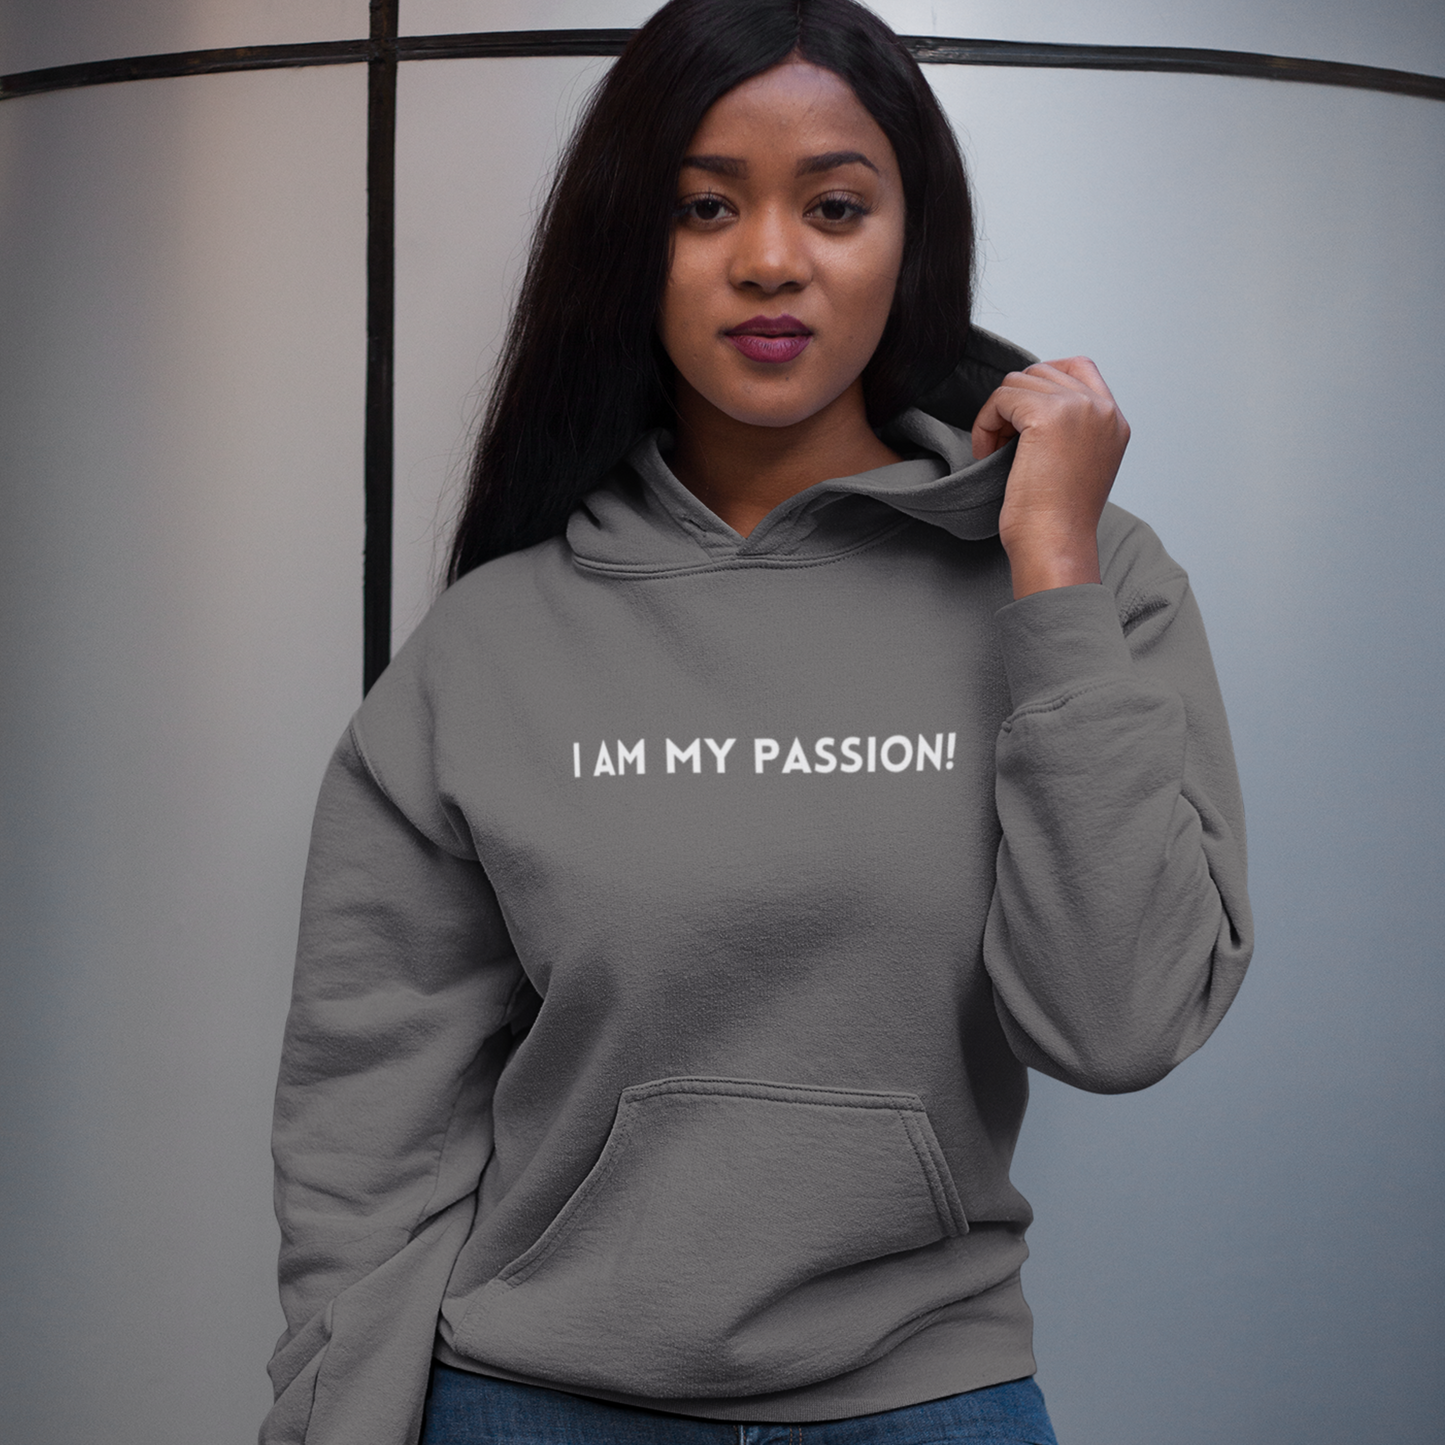 I am my passion unisex hooded sweatshirt gift,  inspirational words hoodie gift, hoodie gift for friends or family